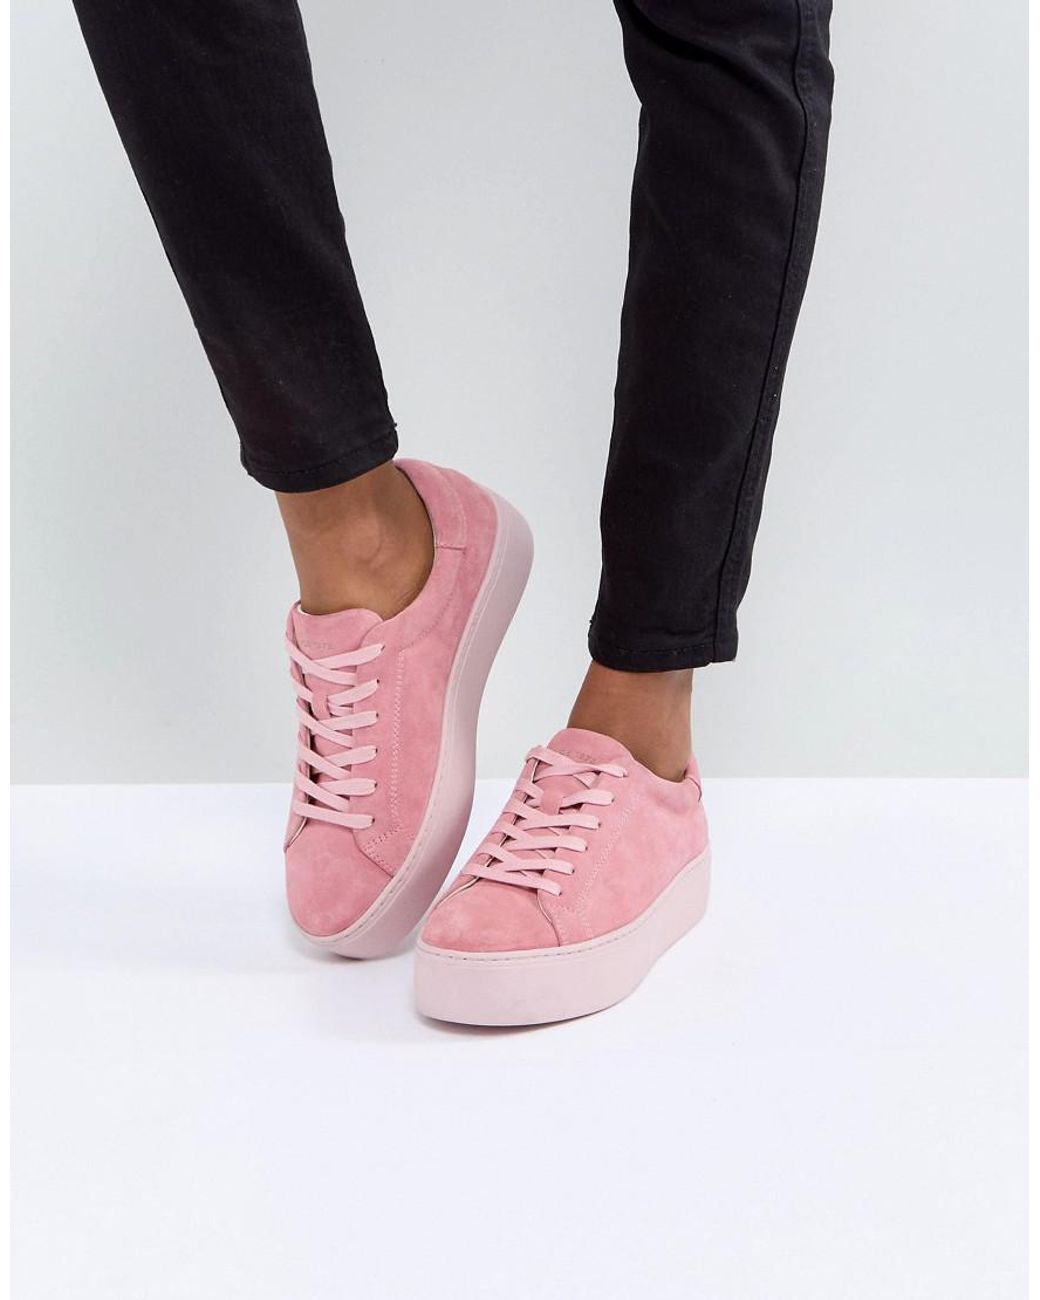 Vagabond Shoemakers Suede Jessie Trainers in Pink | Lyst